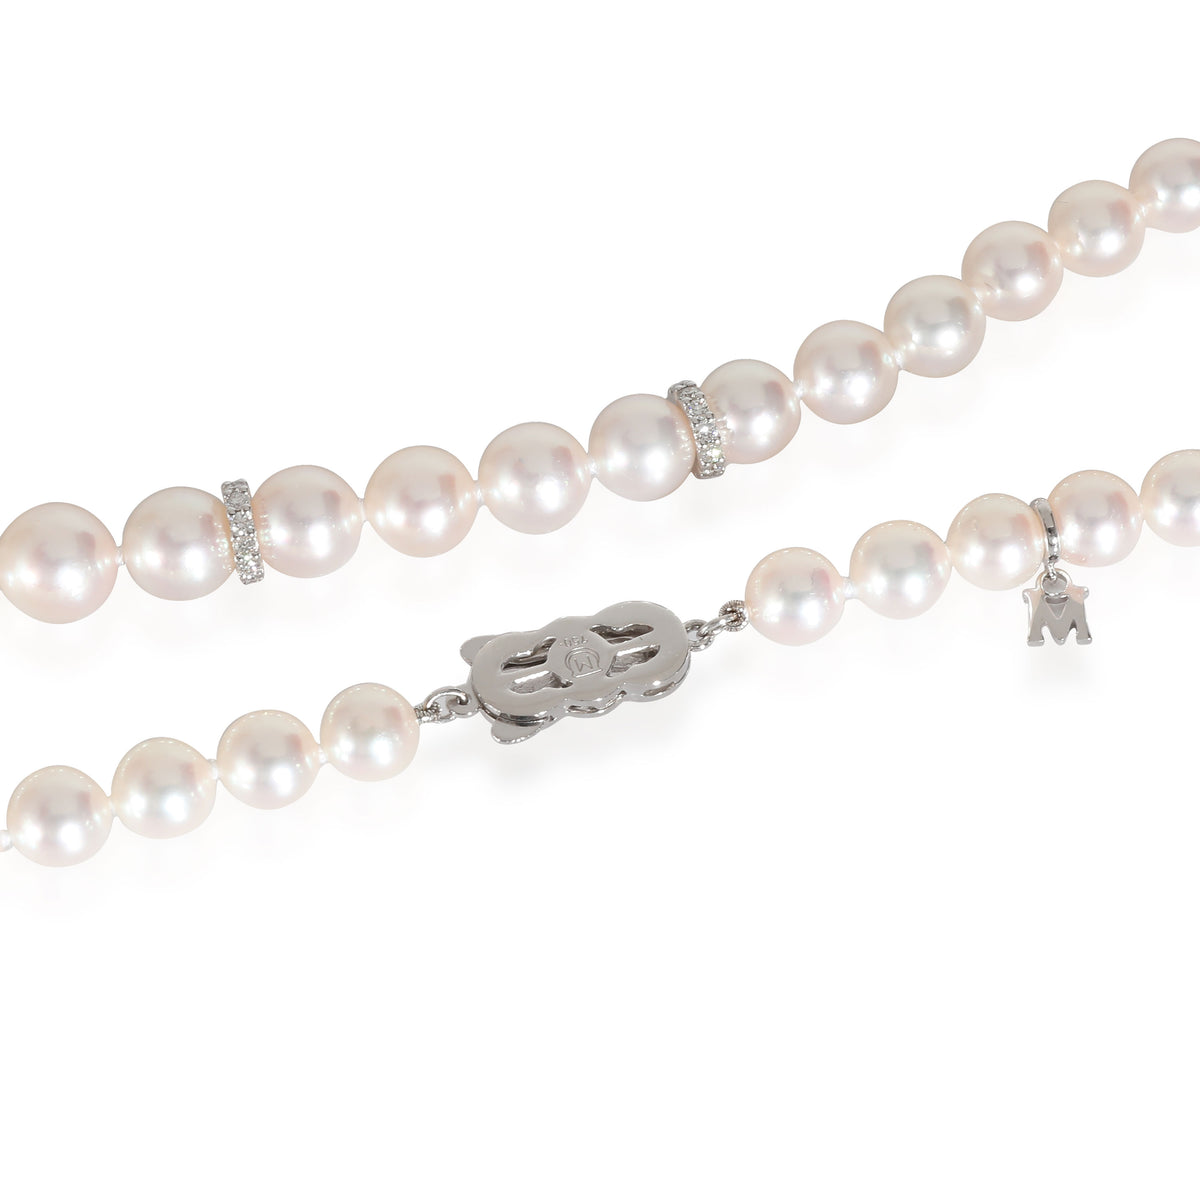 White Gold Akoya Graduated Pearl Strand Necklace With Diamond Rondelles